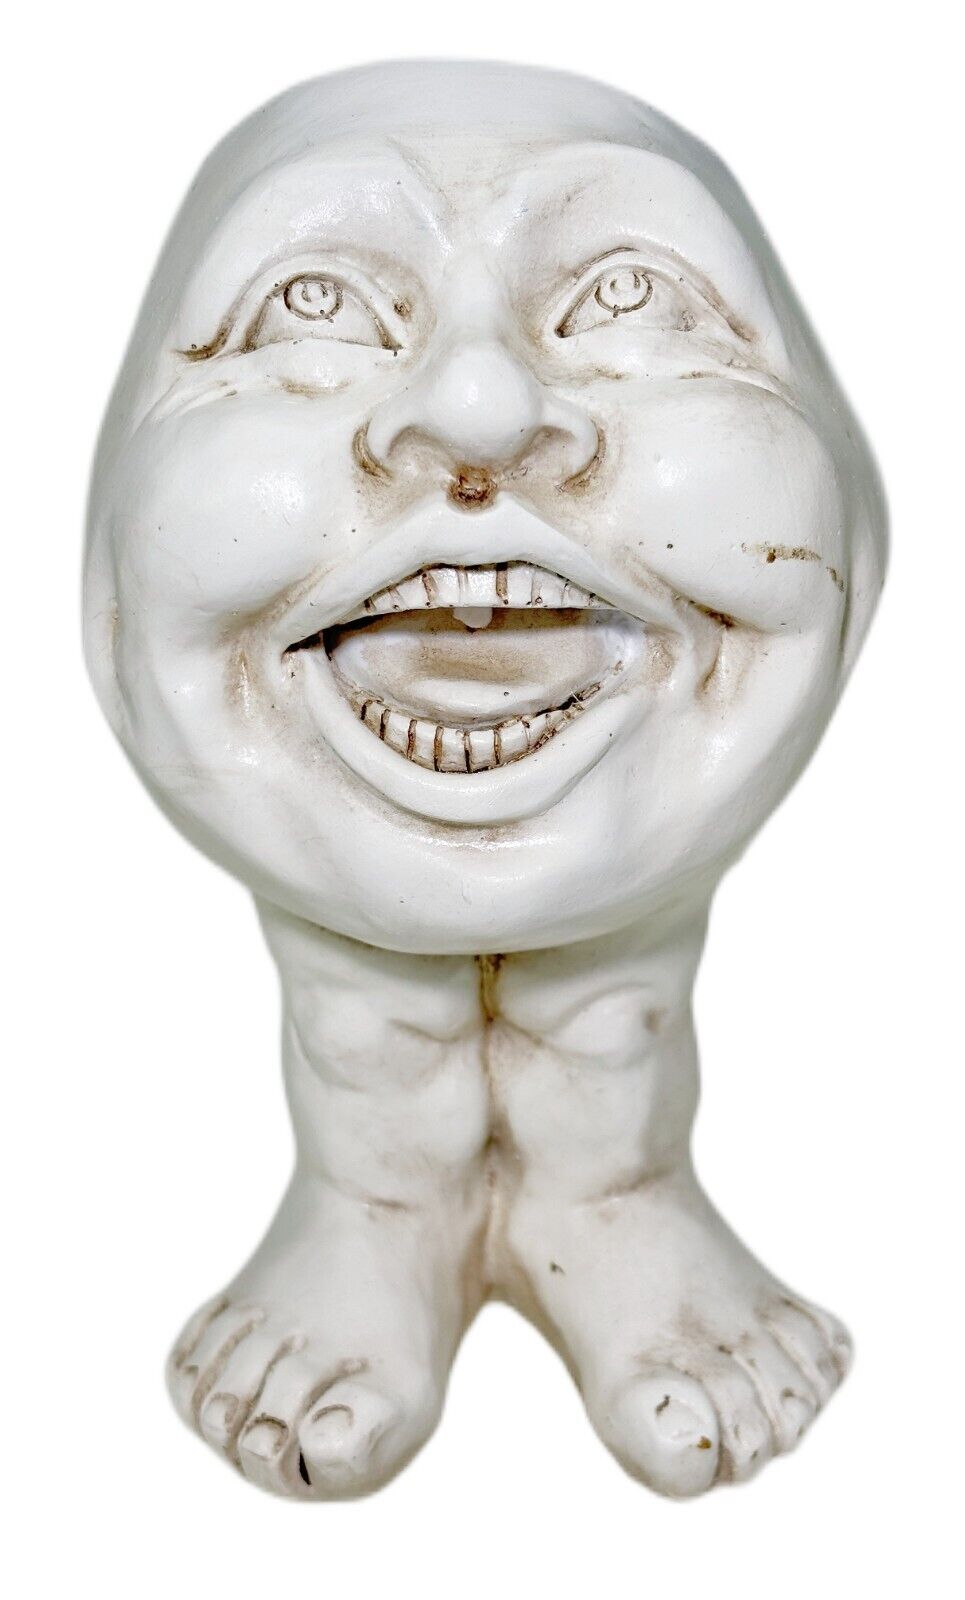 6” Smiling Muggly Face Teeth Pot Dry Flower Vase Footed Happy Laughing